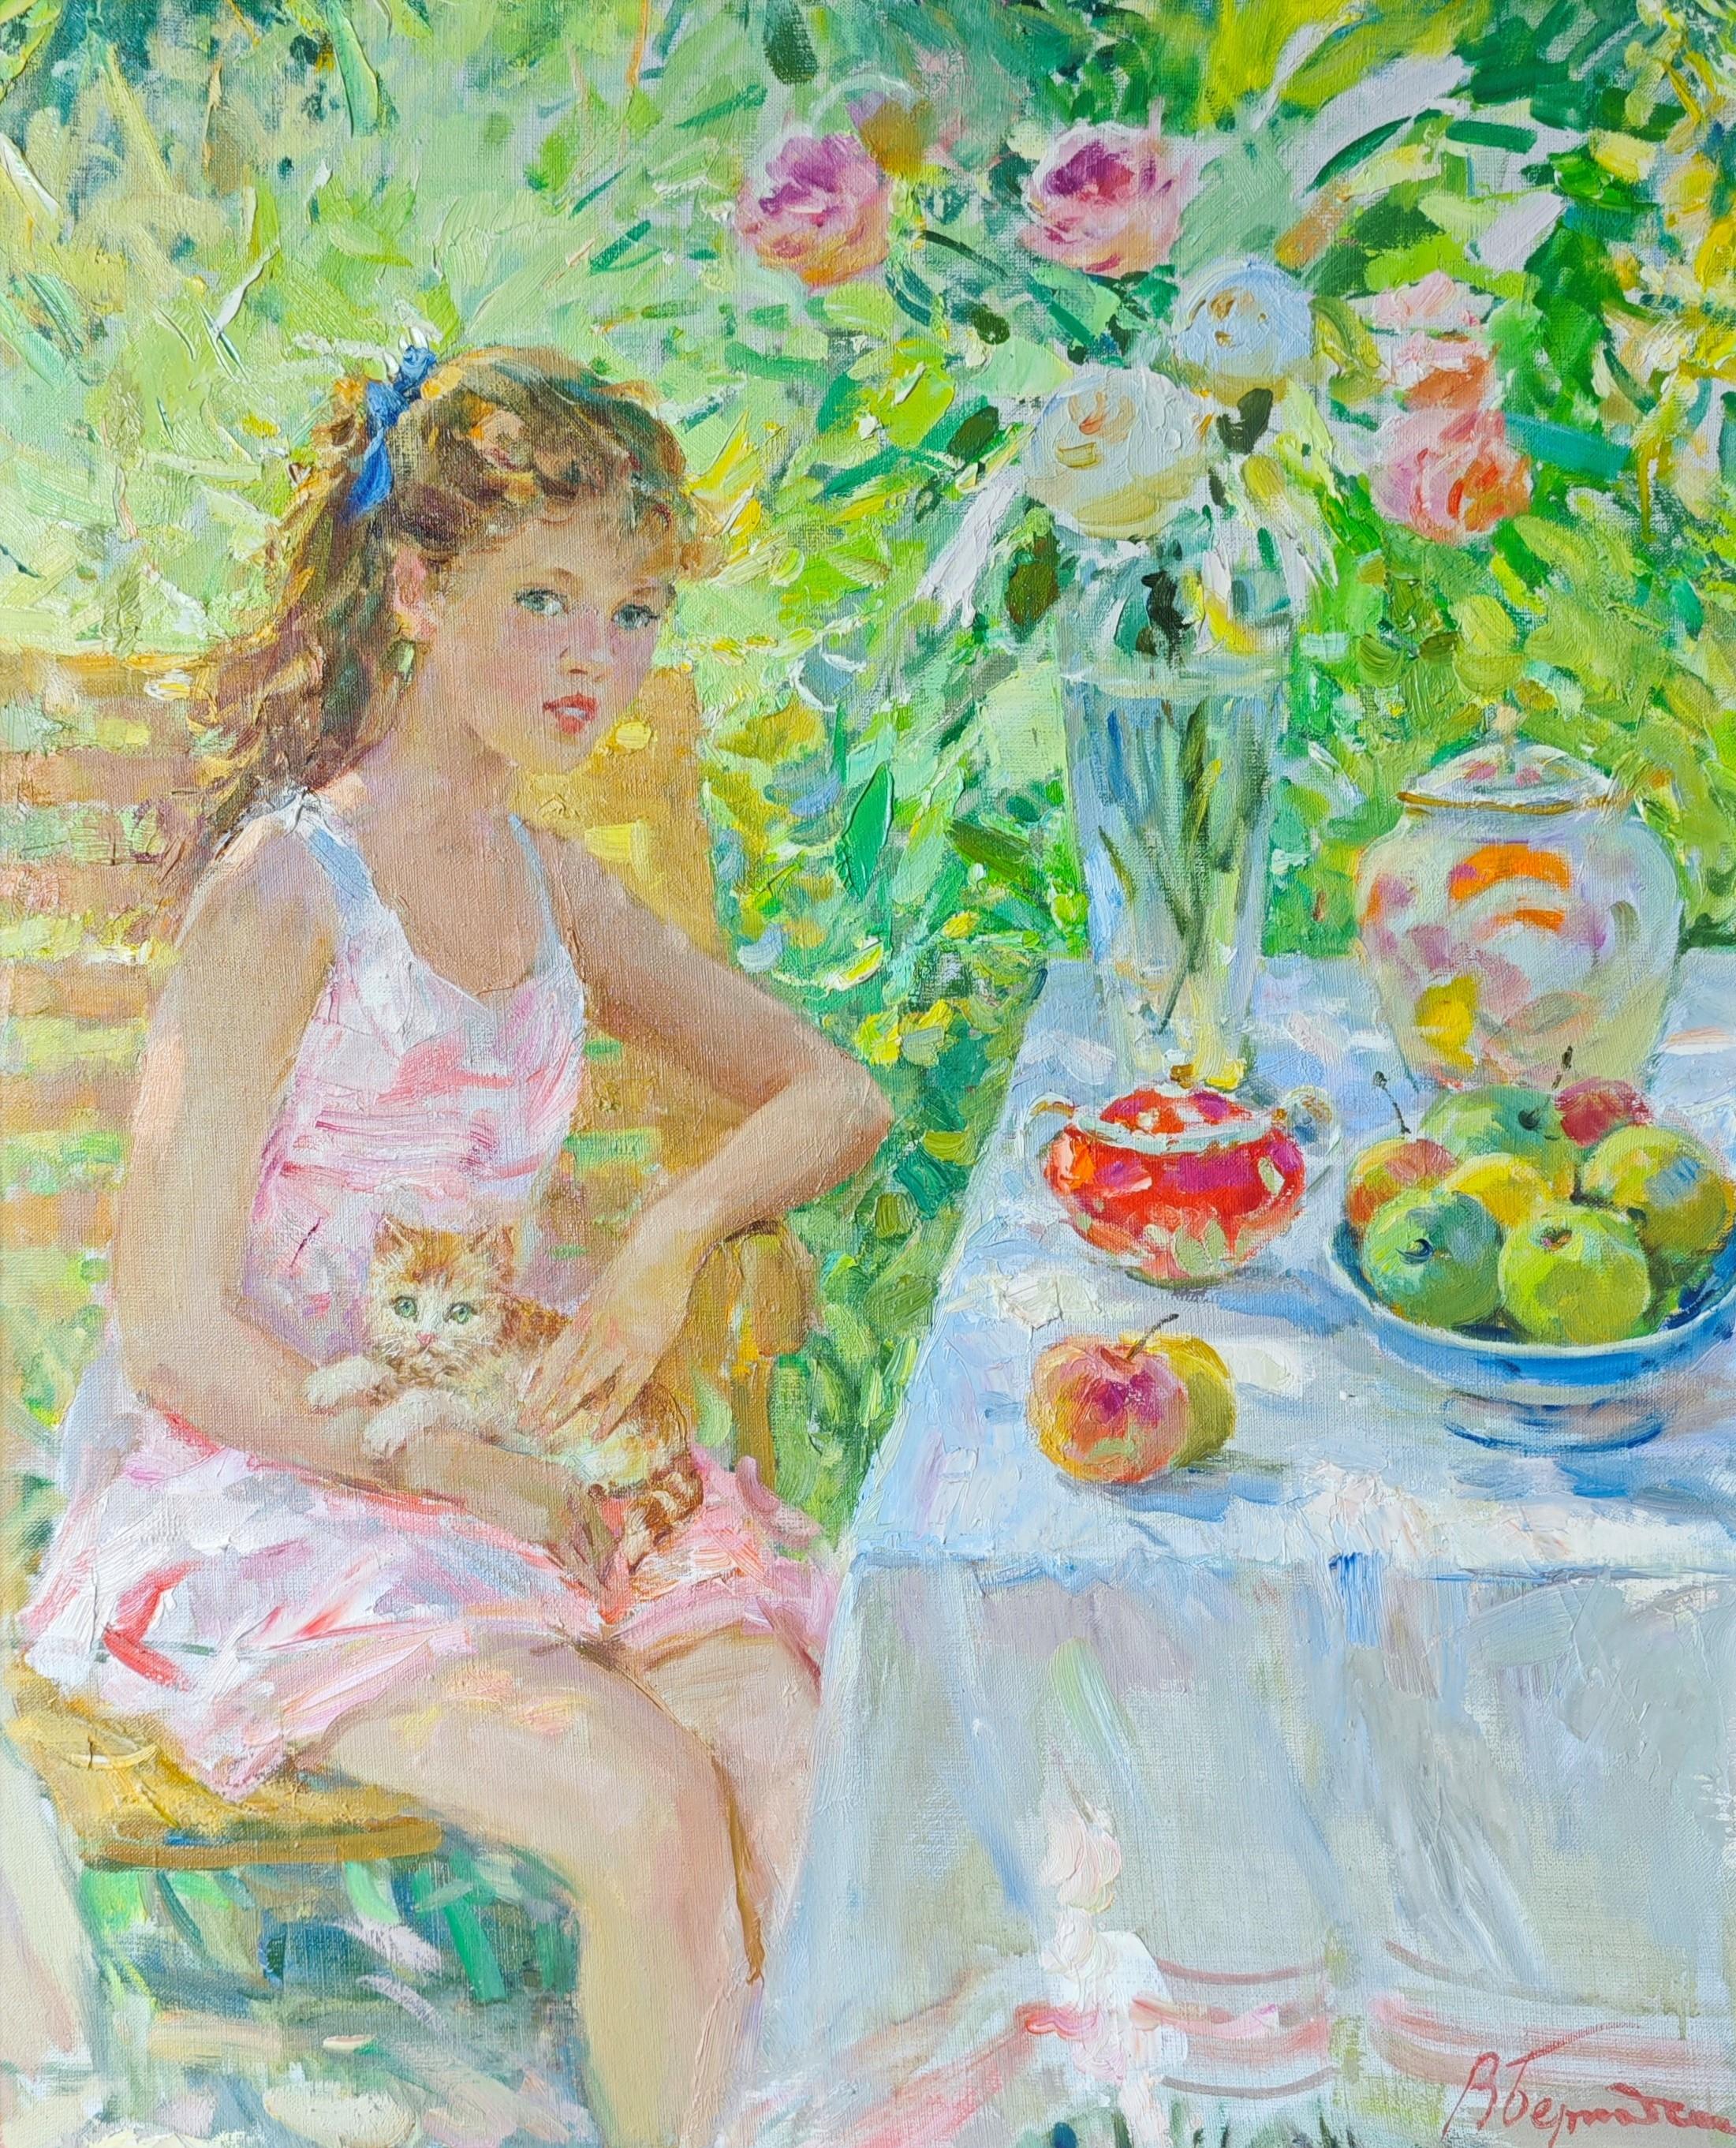 Valentin Danilovitch Bernadski Figurative Painting - Portrait of a Young Girl holding a Kitten, seated in a Summer Garden